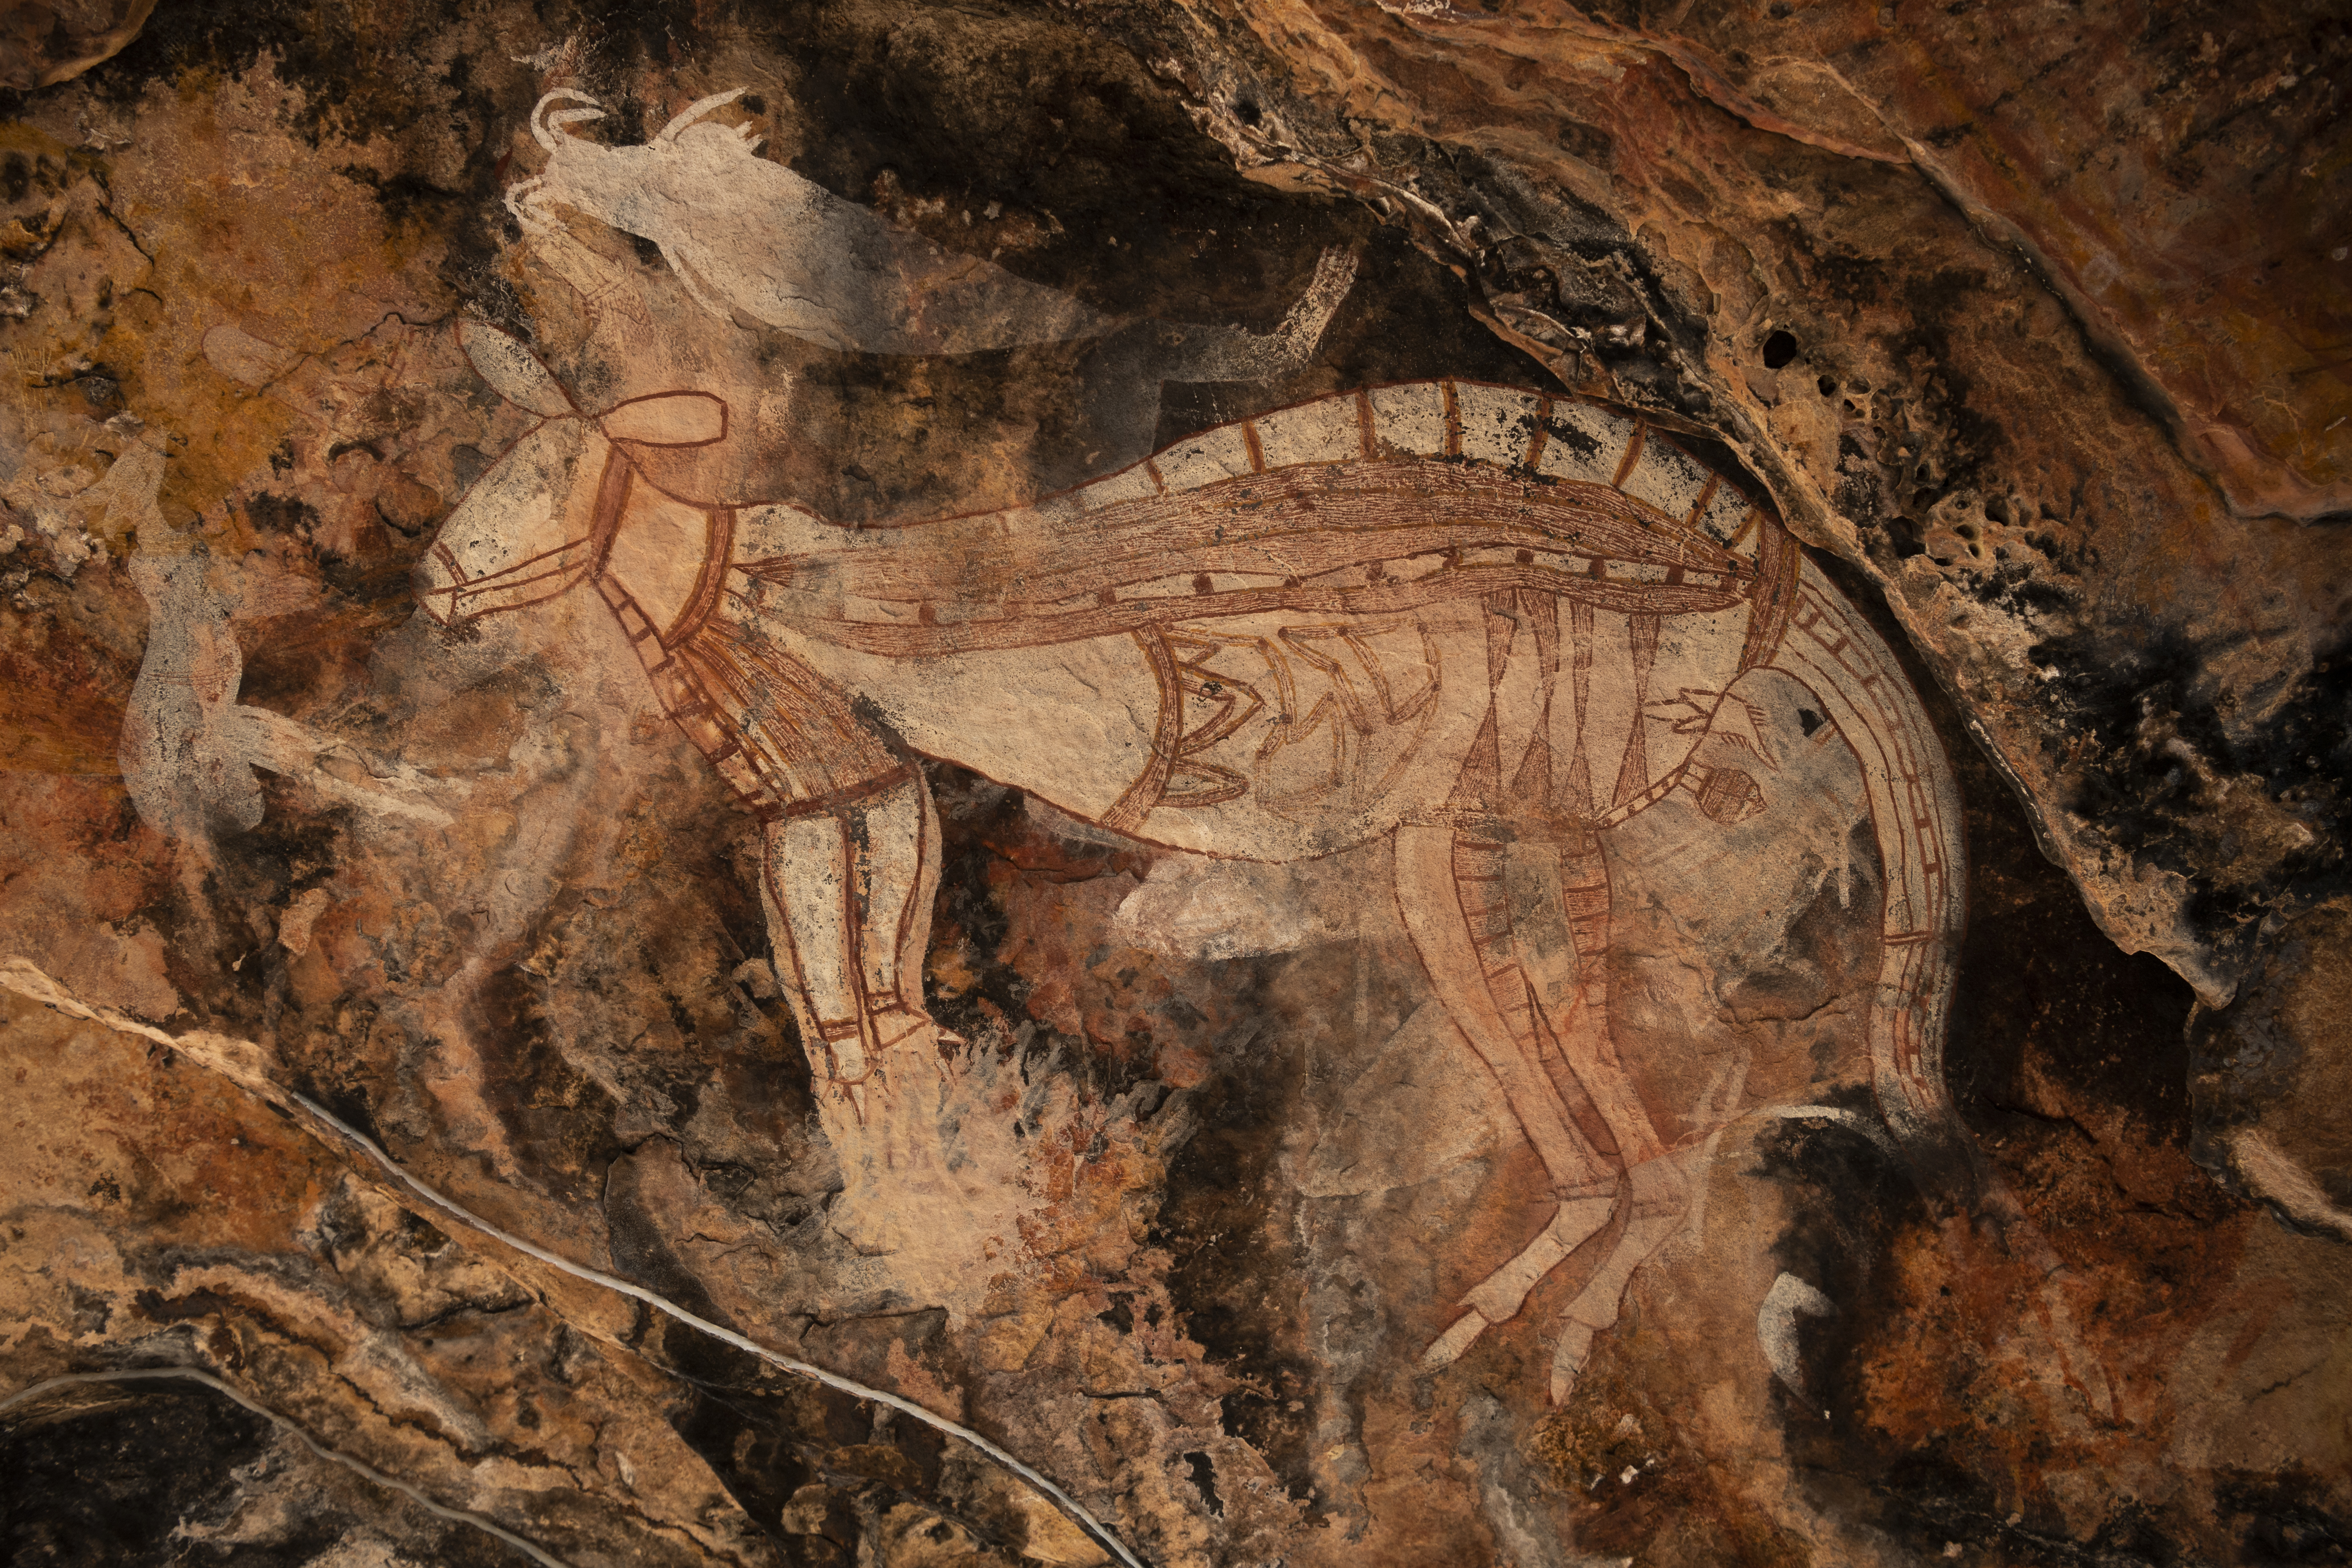 A painting of a kangaroo among dozens of other rock art paintings on the roof of a cave in Arnhem Land, Australia. Each year, sacred rock art sites are cleared of debris that might burn and destroy the ancient paintings when the fires move through. A nearby archaeological dig recovered traces of ochre and human remains, dating back some 65,000 years.